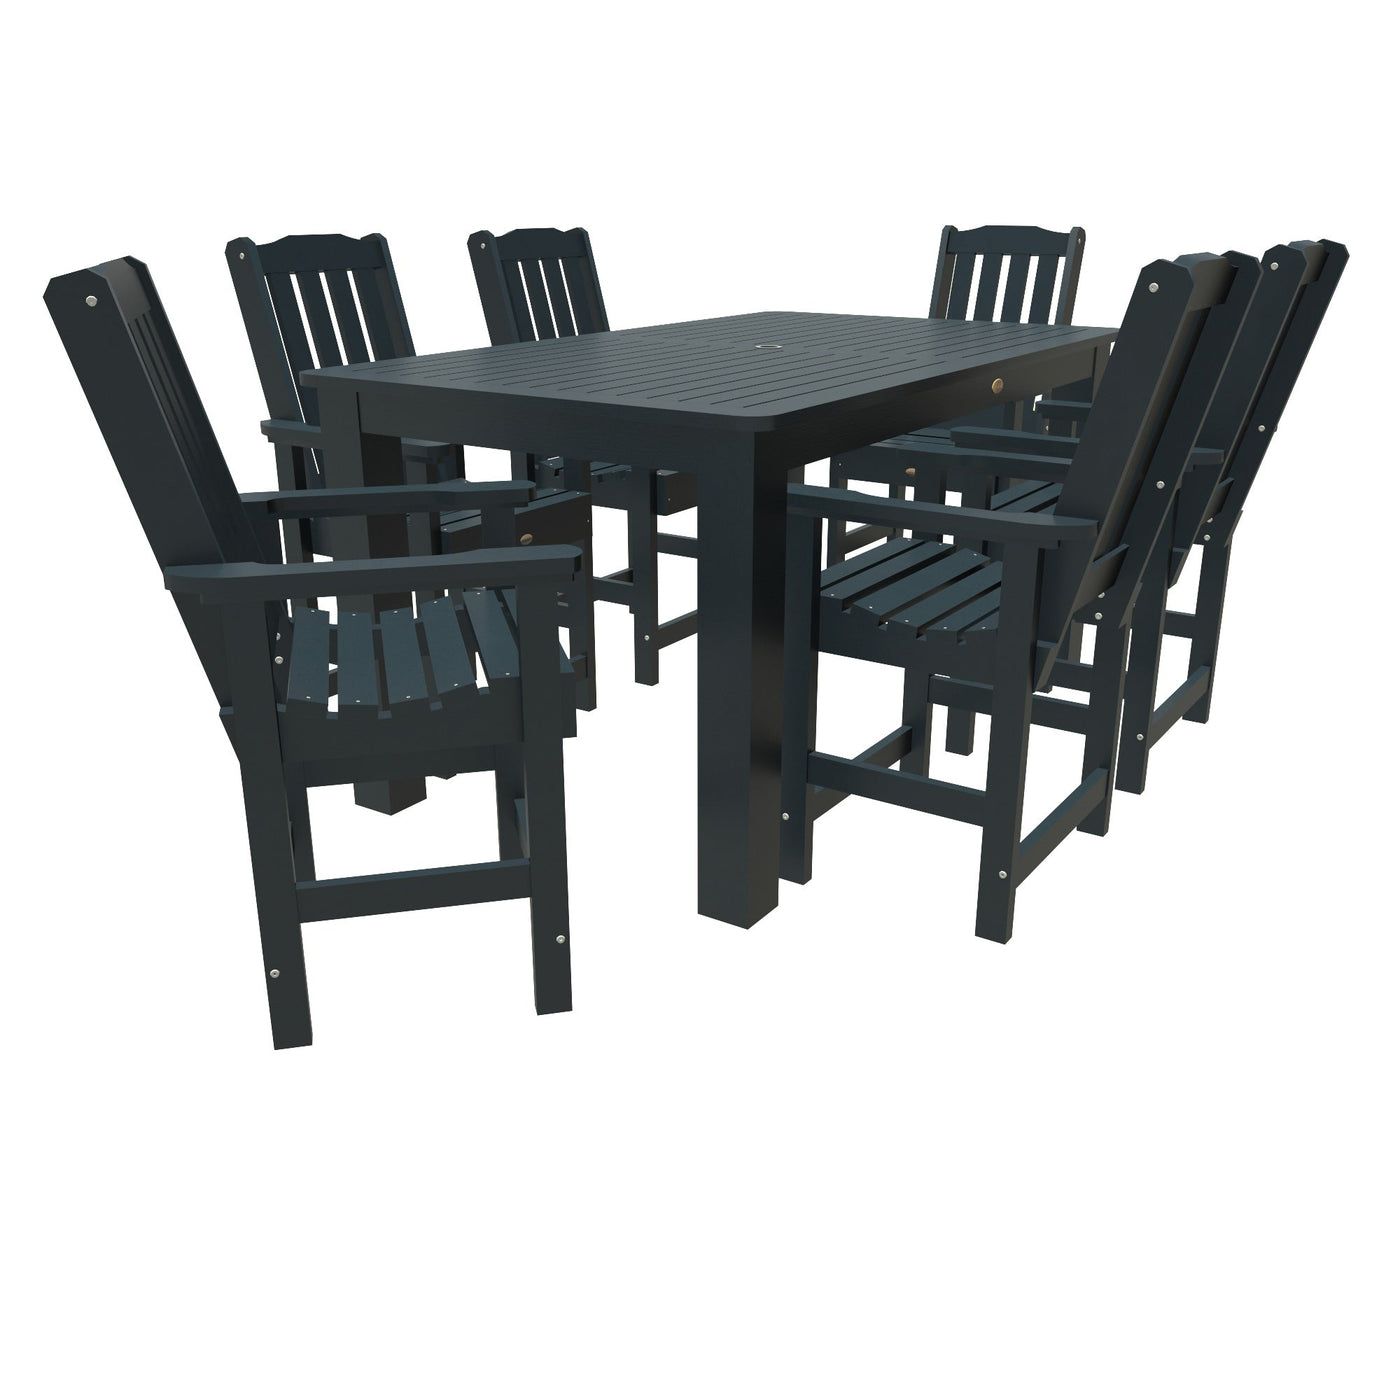 Lehigh 7pc Rectangular Outdoor Dining Set 42in x 72in - Counter Height Dining Highwood USA Federal Blue 